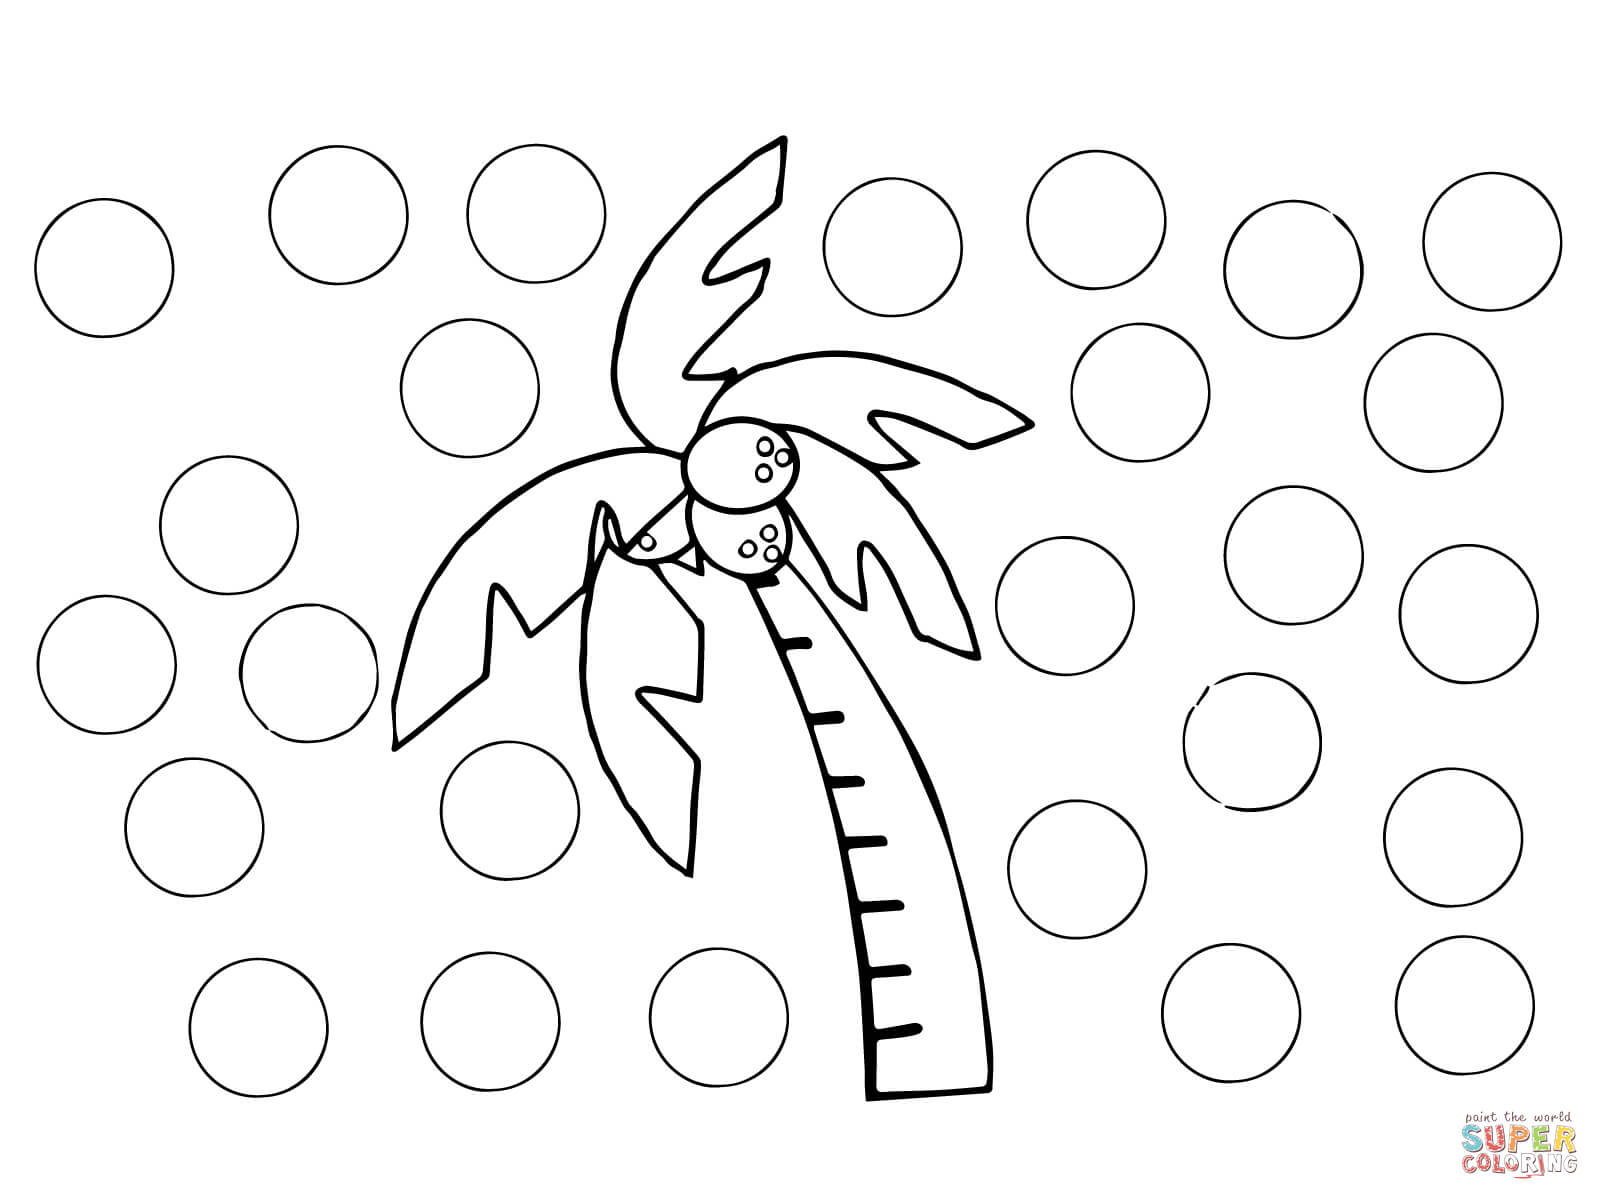 Chicka Chicka Boom Boom Blank Letters coloring page | Free ...